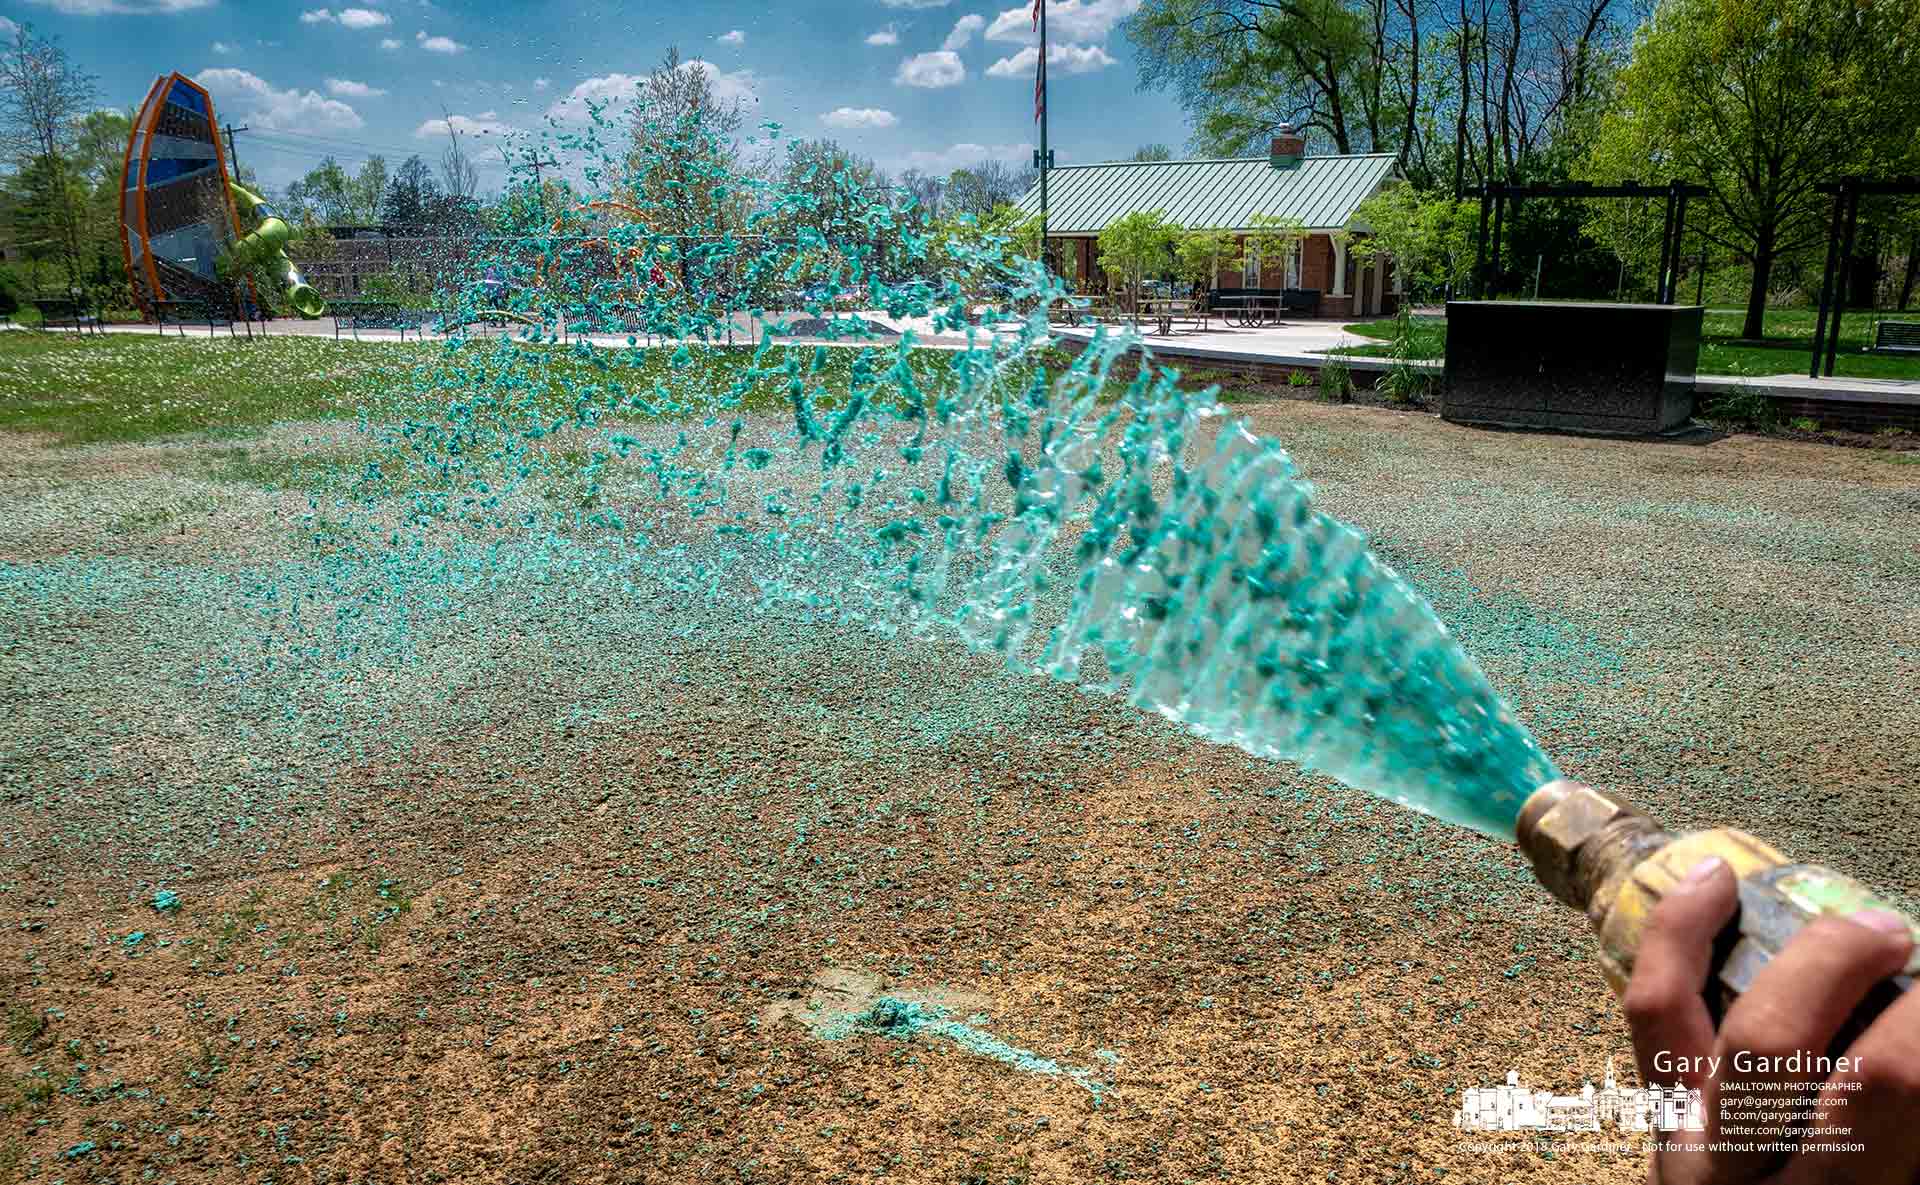 A landscaper sprays a mixture of water, grass seed, and a green mulch onto sections of Hanby Park as it nears completion of the installation of a new playground and water spray area. My Final Photo for May 8, 2018.